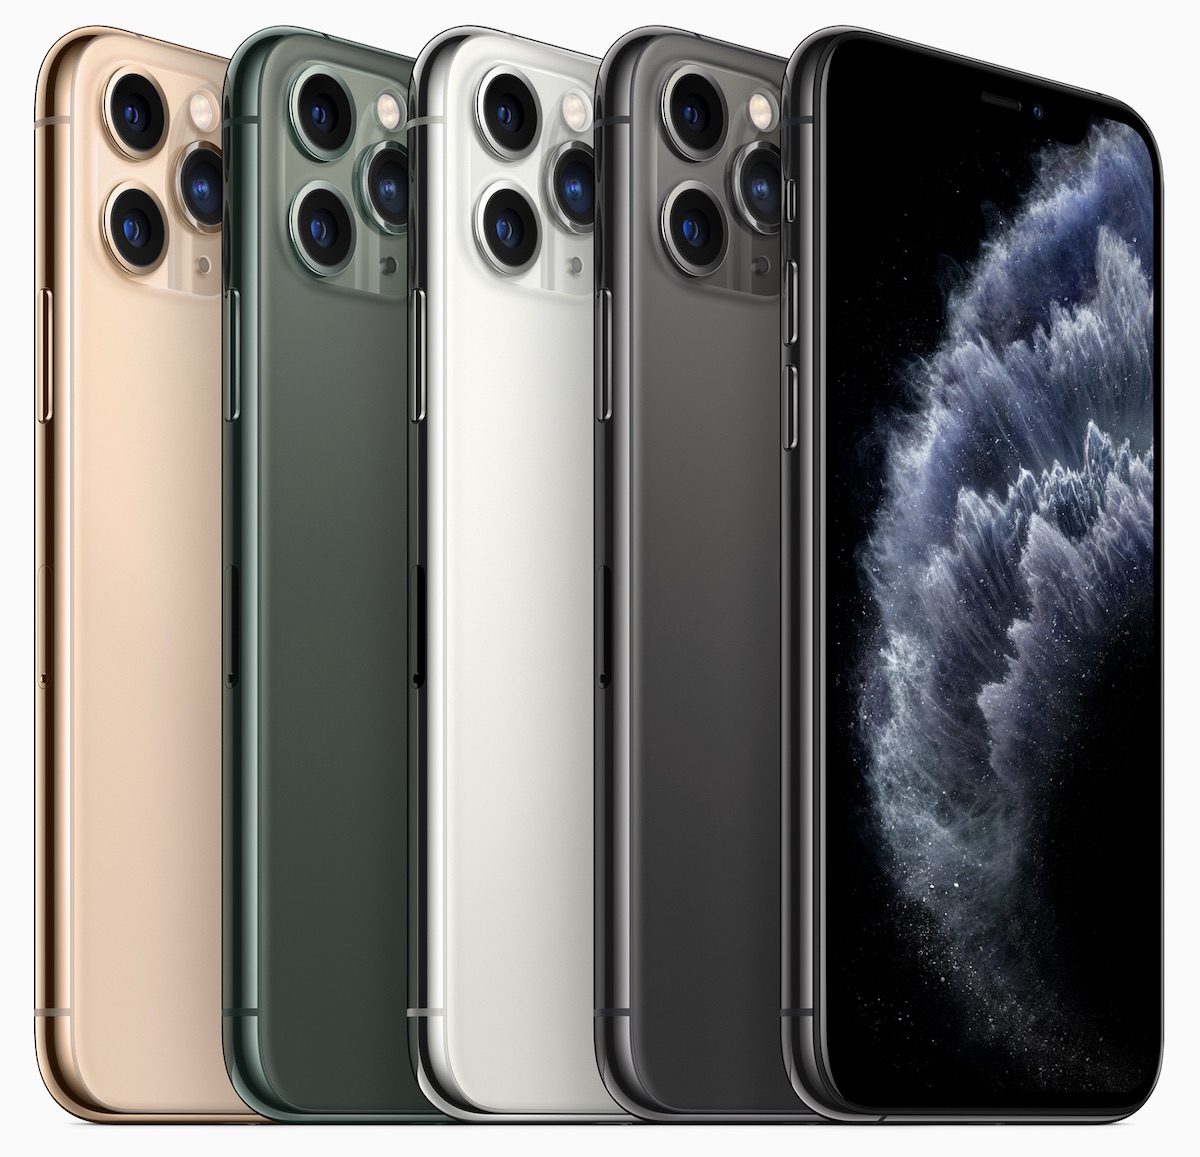 Apple Announces iPhone 11 Pro and iPhone 11 Pro Max With ...